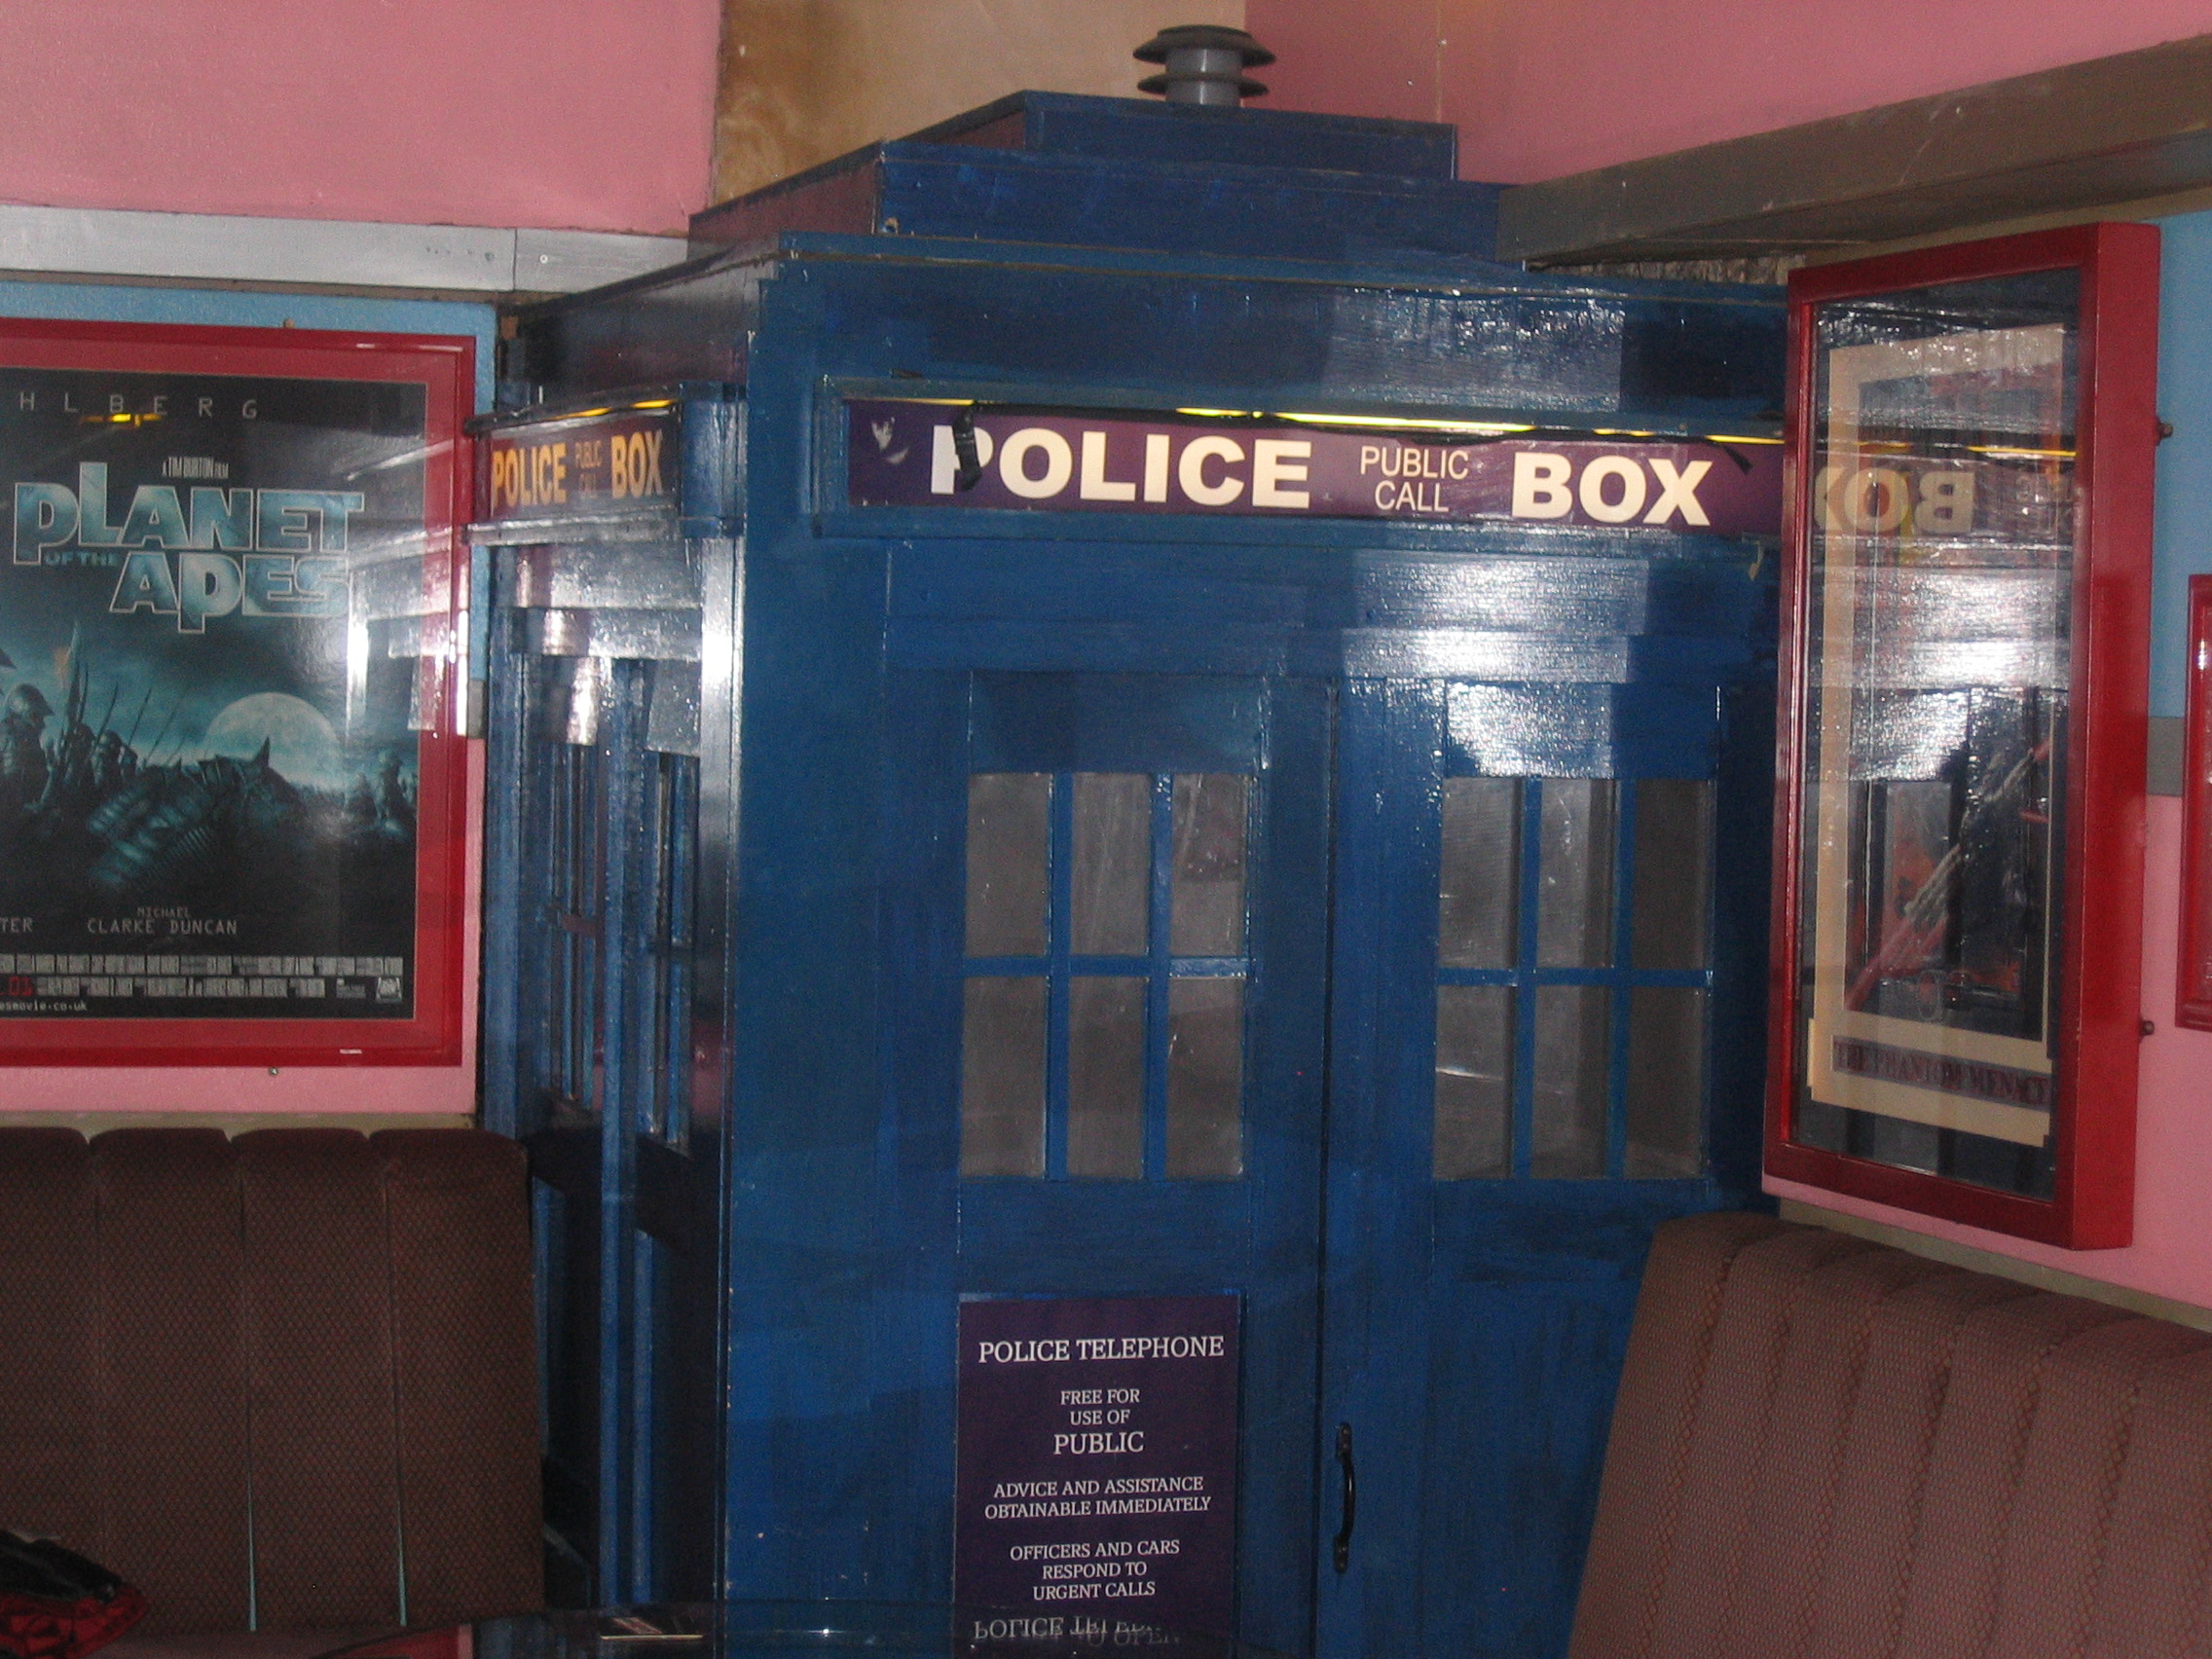 Photo taken by me – Dr Who TARDIS in FAB Café, Manchester